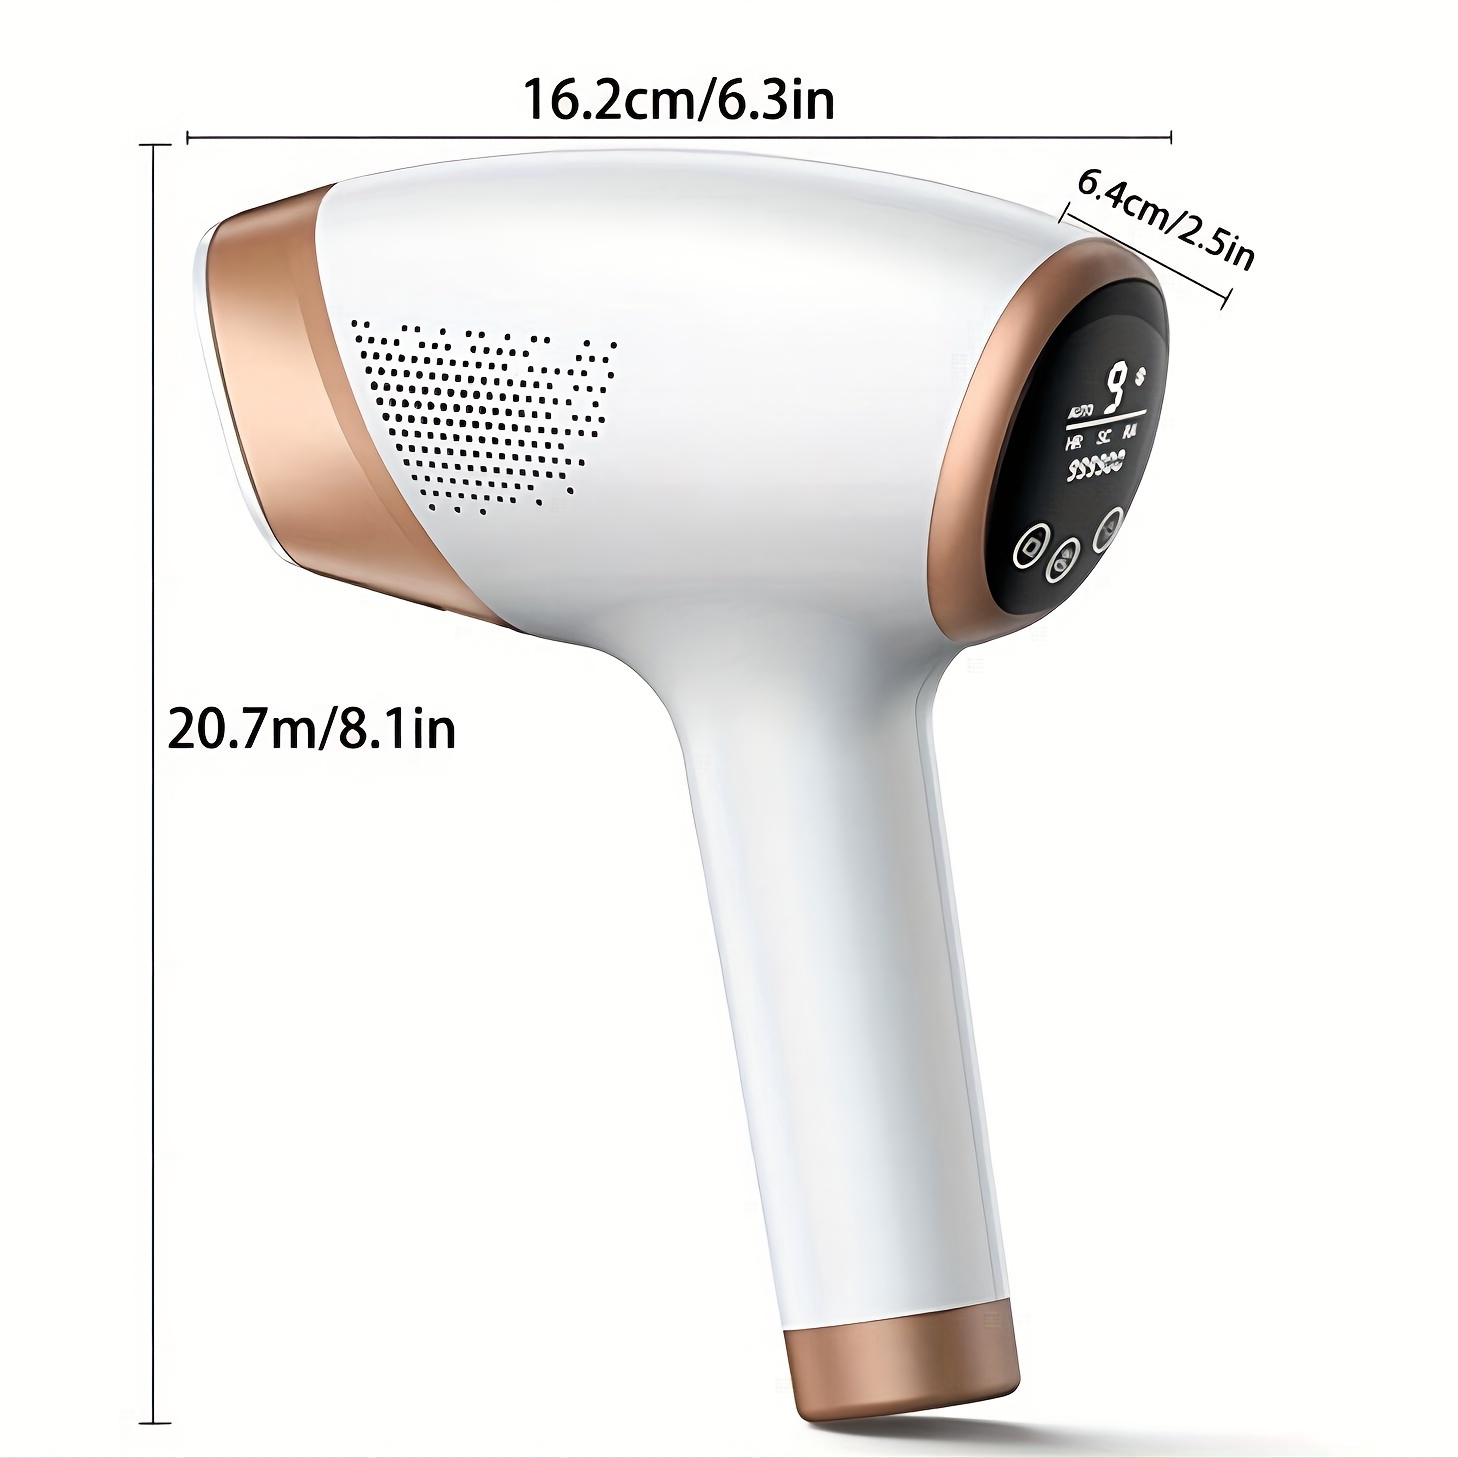 painless ipl hair removal device for women 999900 flashes remove hair on legs armpits back arms face bikini line at home treatment details 2